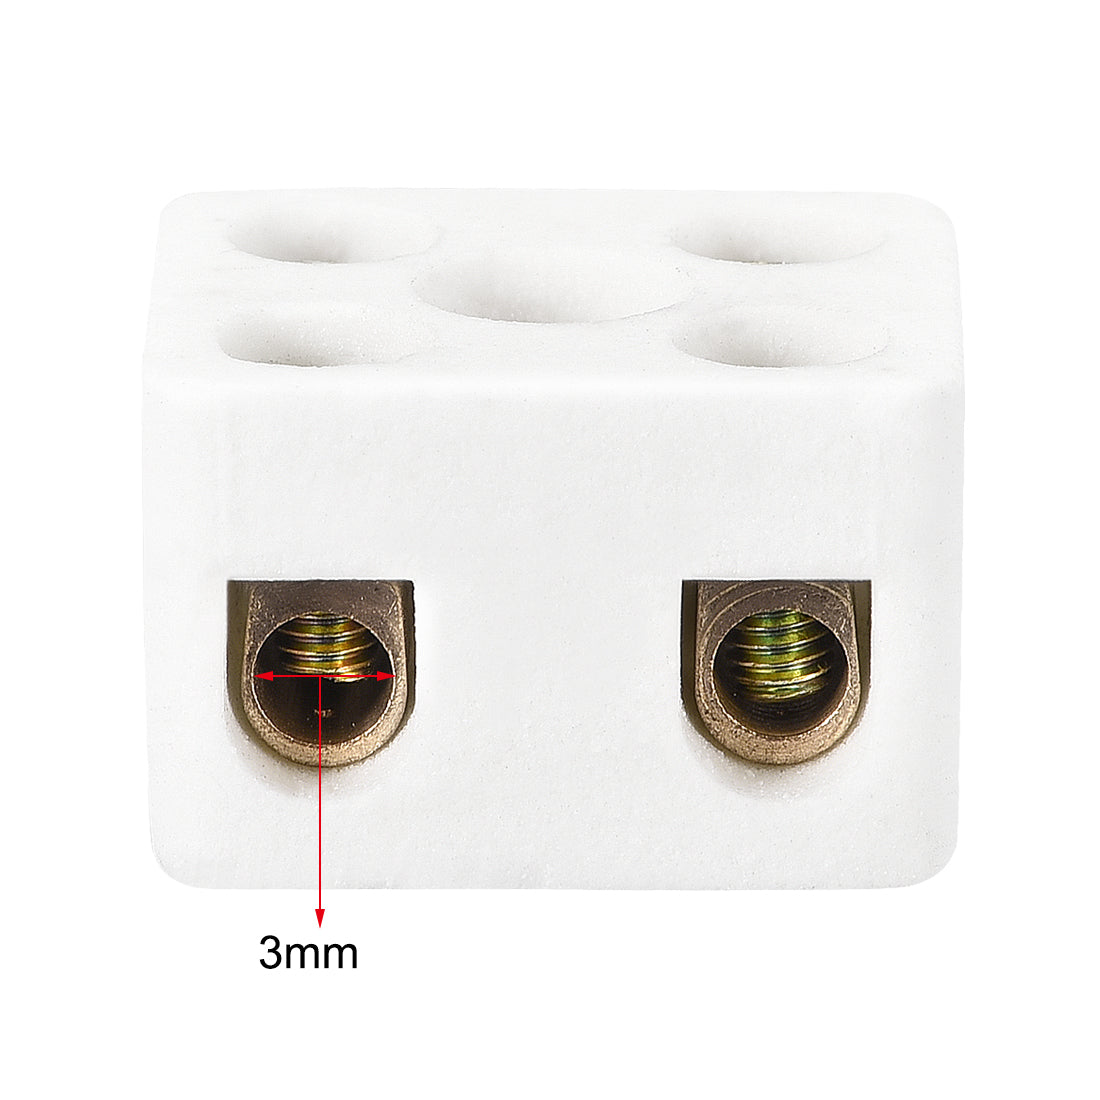 uxcell Uxcell 2 Way Ceramics Terminal Blocks High Temp Porcelain Ceramic Connectors 21.5x19.5x14.2mm for Electrical Wire Cable 10 Pcs